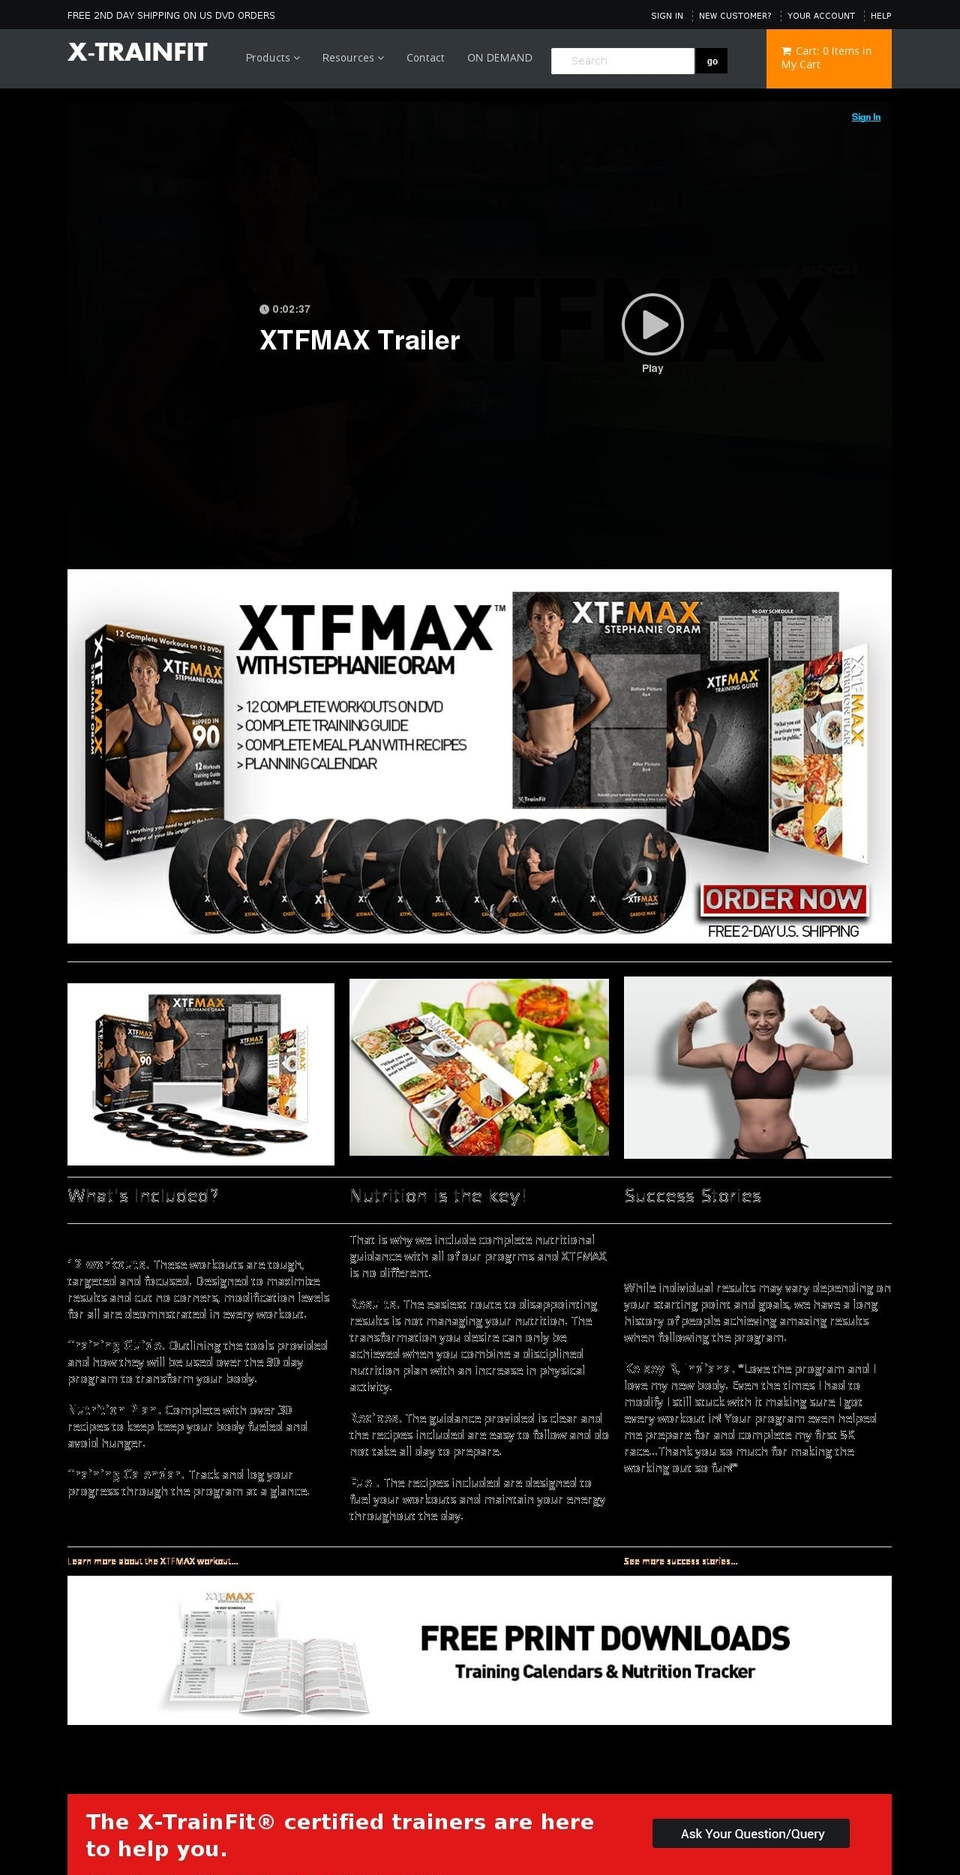 X-trainfit Shopify theme site example xtfmax.mobi